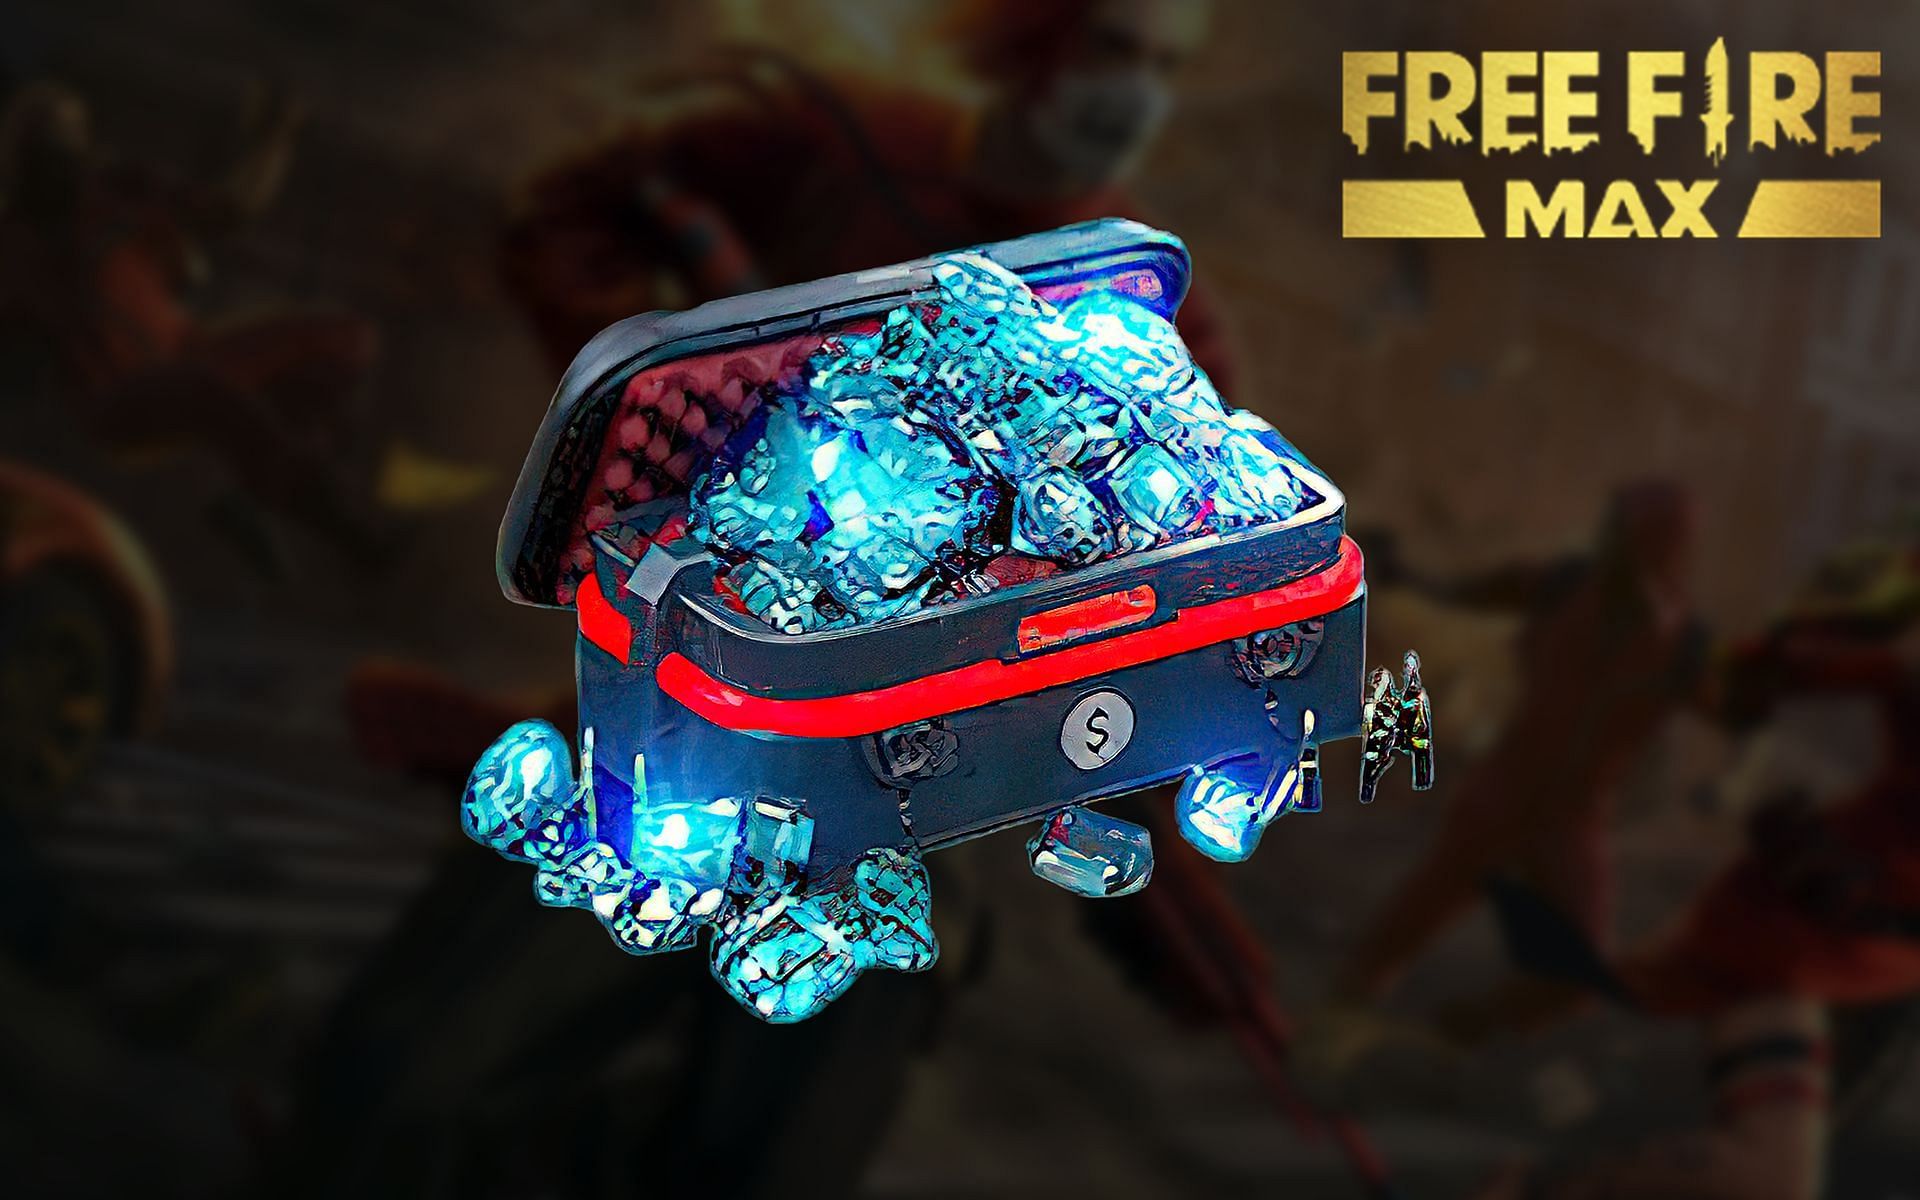 Diamonds are the premium in-game currency in Free Fire MAX (Image via Sportskeeda)